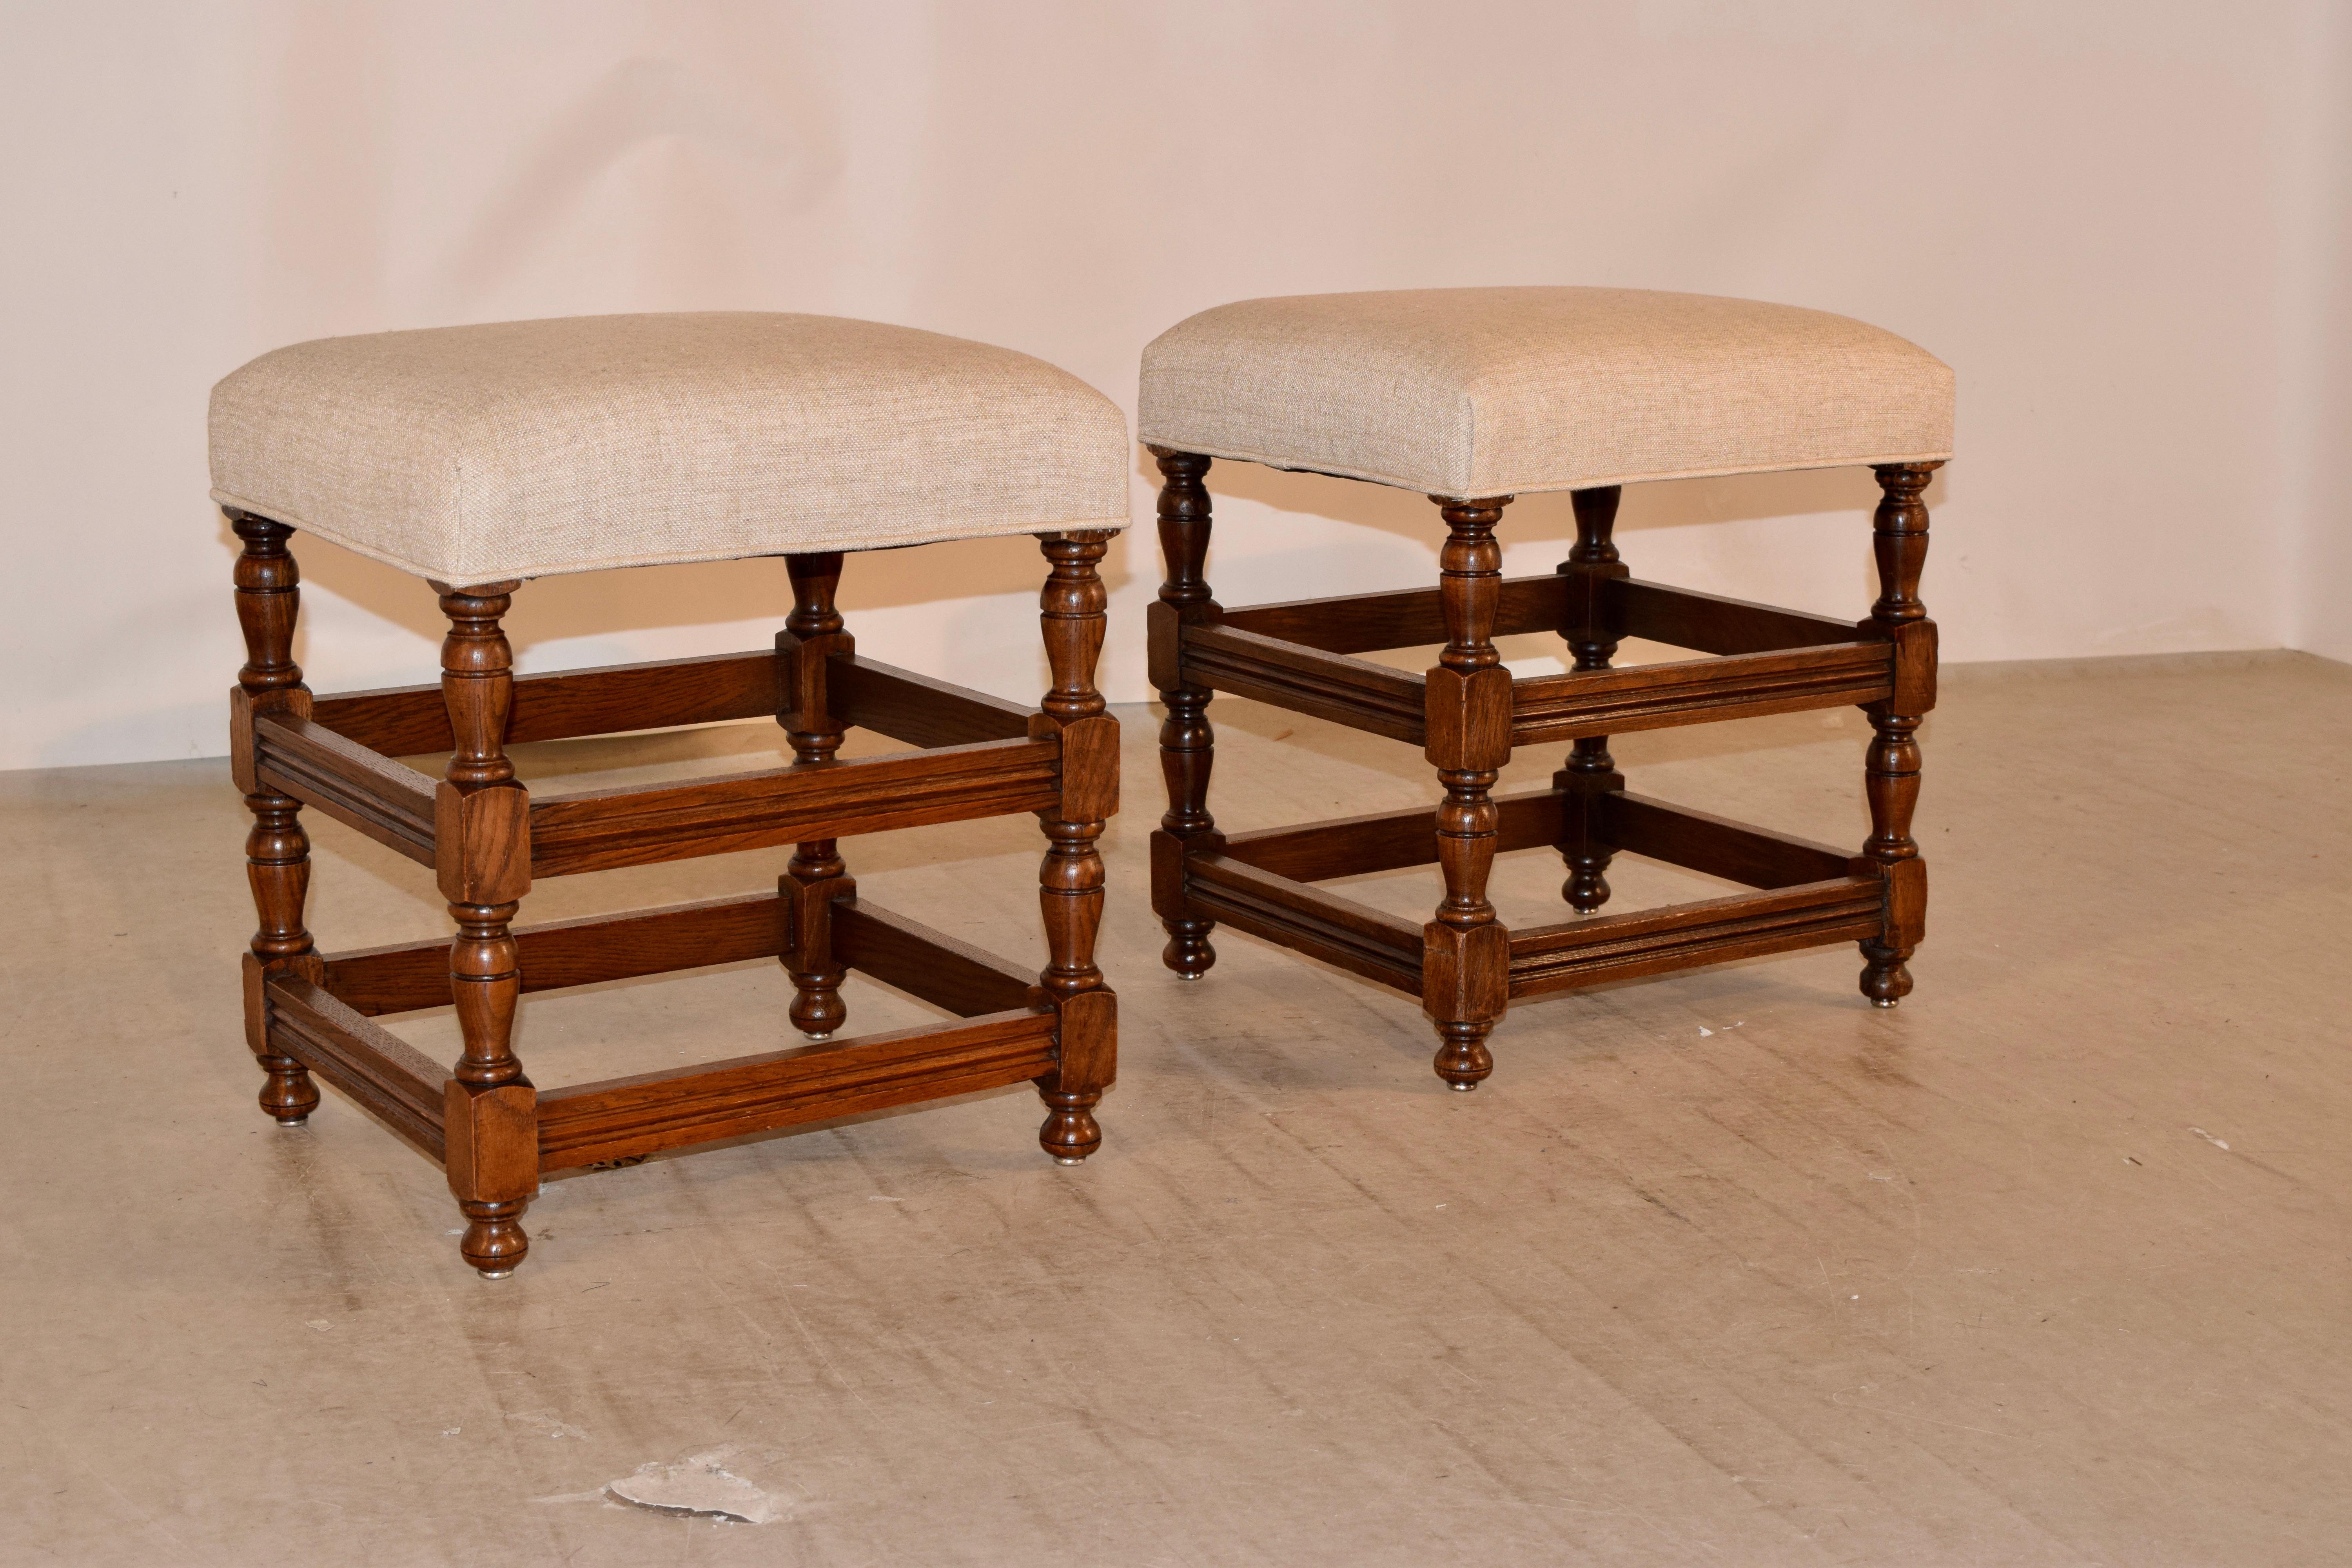 Pair of English oak turned stools with newly upholstered seats in linen. The frames have hand-turned legs joined by molded cross stretchers and raised on hand-turned feet.
 